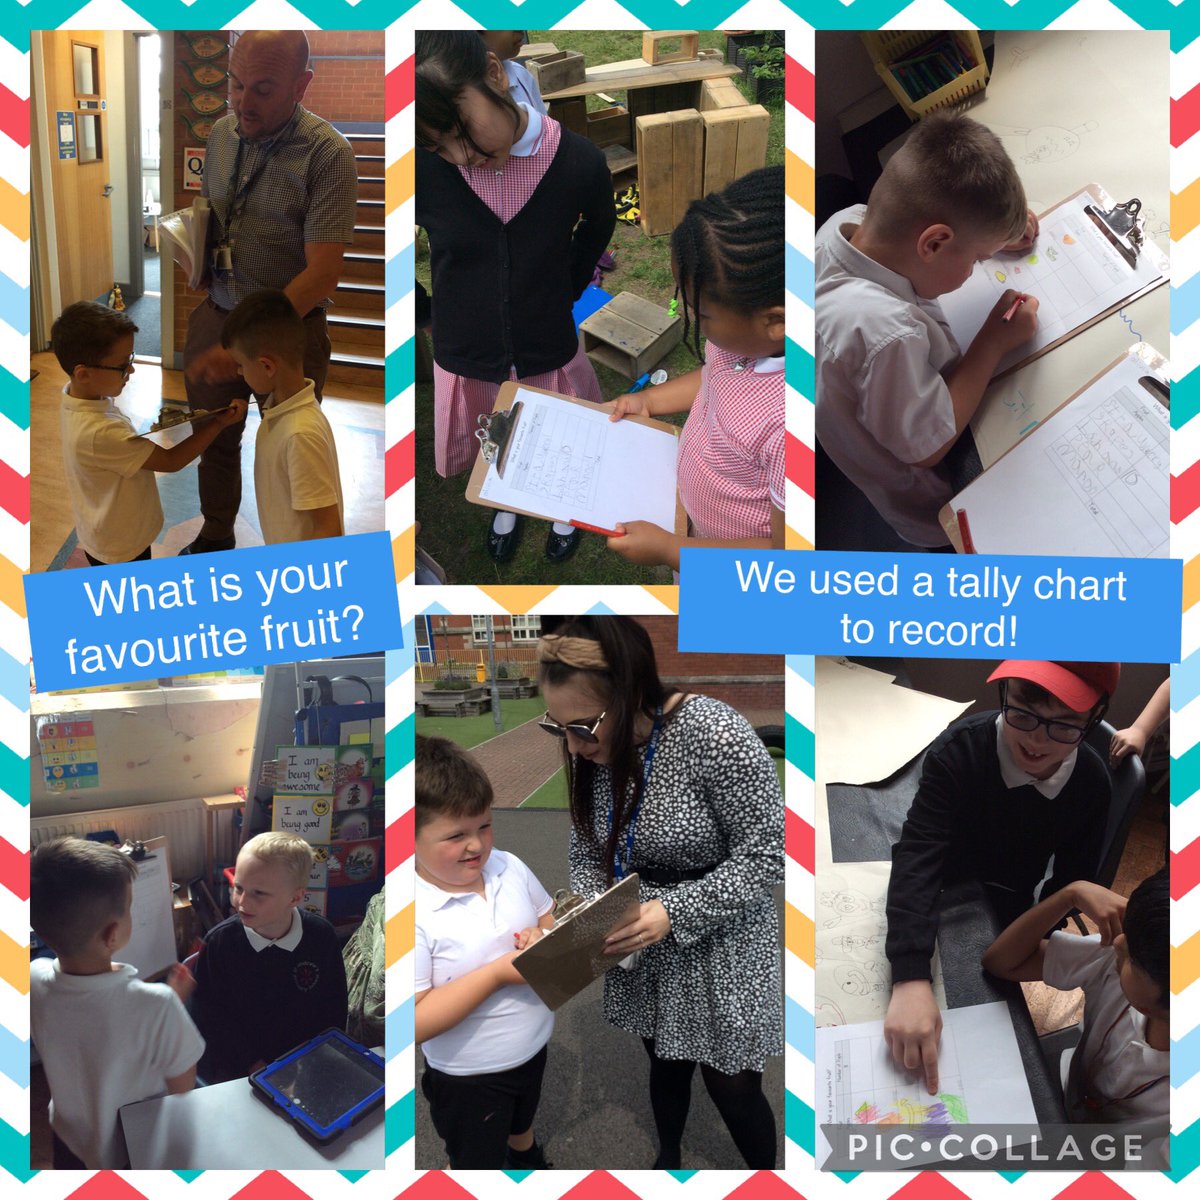 Thank you to Jenkins Base for letting us come and visit their class! We asked them ‘What is your favourite fruit?’ and we recorded their answers using a tally chart. #HealthyLivingWeek #AmbitiousCapable